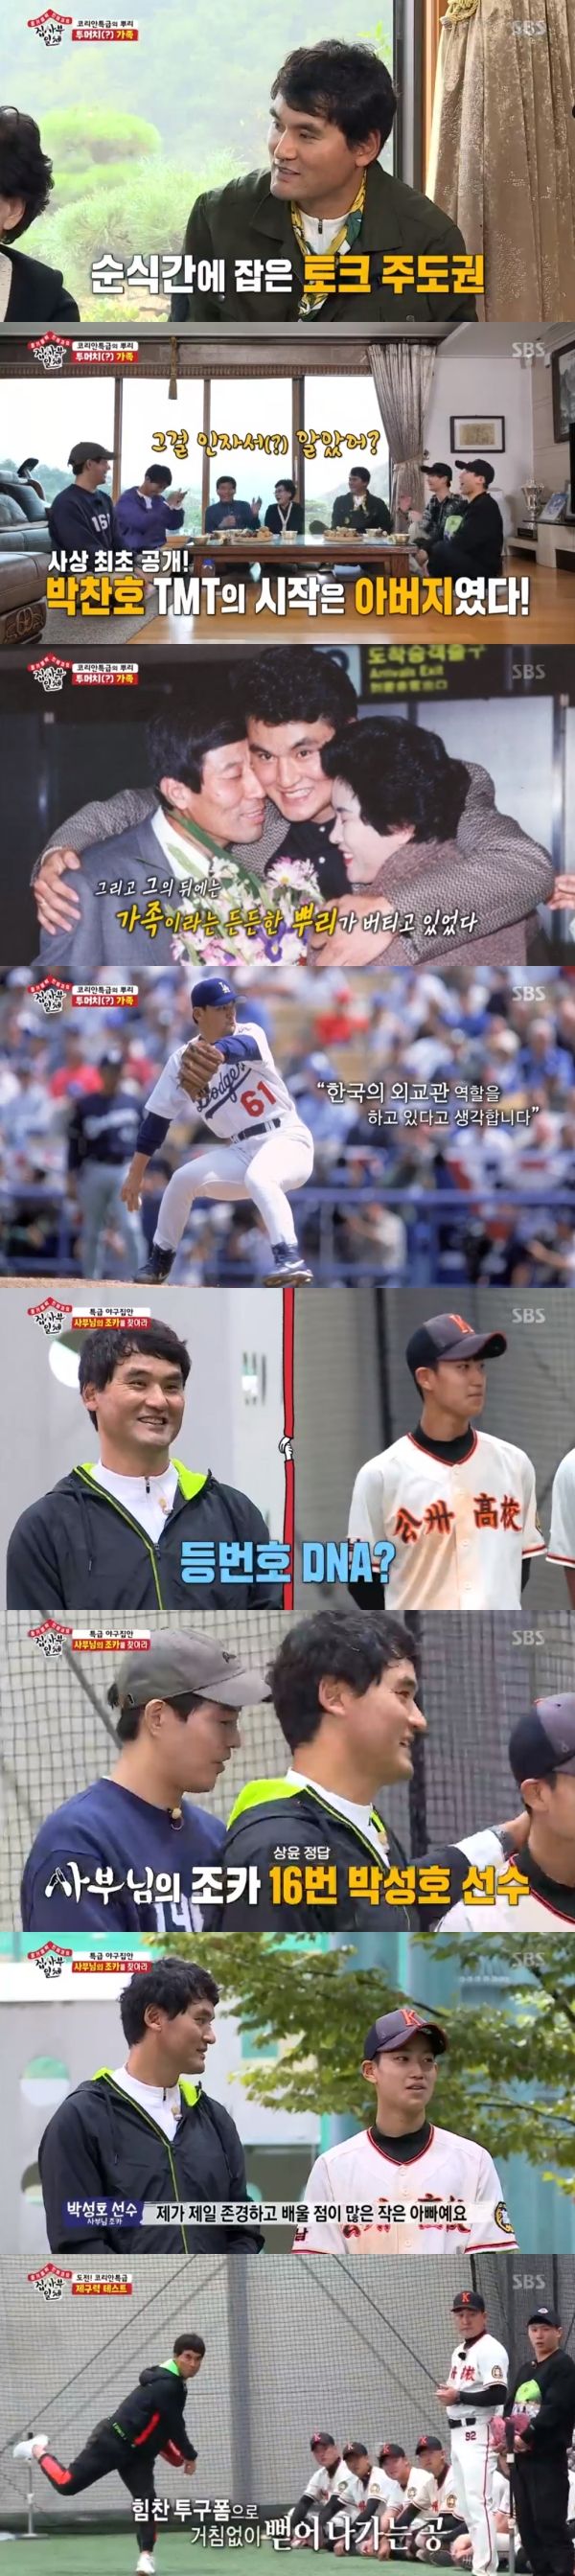 Legendary major leaguer Chan Ho Park appeared.In SBS All The Butlers broadcasted on the 20th, Lee Sang-yoon, Lee Seung-gi, Yang Se-hyeong and Yook Sungjae who visited the princess of Chungnam were shown to meet Chan Ho Park as master.On the day of the broadcast, the members looked at the life record before welcoming the master. It is active, playful and playful in the record of the master full of numbers.The master, who showed up in the expectation of the members, was Chan Ho Park, who opened the statement, I think the concept of roots is important.I do not have experience in United States of America, so I think about education that tells my roots, he said.Chan Ho Park introduced his parents: Chan Ho Park mother treated the members to night and potatoes and said, I think Im going to share it with my hands because I farm.Chan Ho Park laughed about his father, saying, Its the aid TMT; the roots are here.Still, he recited his fathers poem and added, I received it from the United States of America and shed tears.Yang Se-hyeong admired, saying, The horse or SMS is embarrassing, but it is poetry.Chan Ho Park described starting baseball as in the third grade of Elementary School, I went to Baseball to eat ramen.My father initially opposed it, but said, I did well in the supporters association. I could not stop it in junior high school. He said, I am grateful.Chan Ho Park, who visited his alma mater, said, I come to summer and watch the junior pitchers.Chan Ho Park said, I played baseball from the Elementary school until college, and Baseball said, I follow you.There was also a nephew of Chan Ho Park in Baseball.My nephew named his little father Chan Ho Park as a respectable and learned player and named Jung Geun-woo as his favorite baseball player.Yang Se-hyeong, Lee Seung-gi, who saw Chan Ho Park and his nephew exchange the ball, laughed, saying, Little Father is nervous because he catches catch and Little Father is legend.Yook Sungjae stepped back, saying, I can not see the ball when I saw Chan Ho Park unwinding, and Yang Se-hyeong laughed, If I did not avoid it, he said.Chan Ho Park showed fastballs, changeups and curve demonstrations, saying, I do not feel the speed of the hitters to the middle, I know that they are all fastballs.